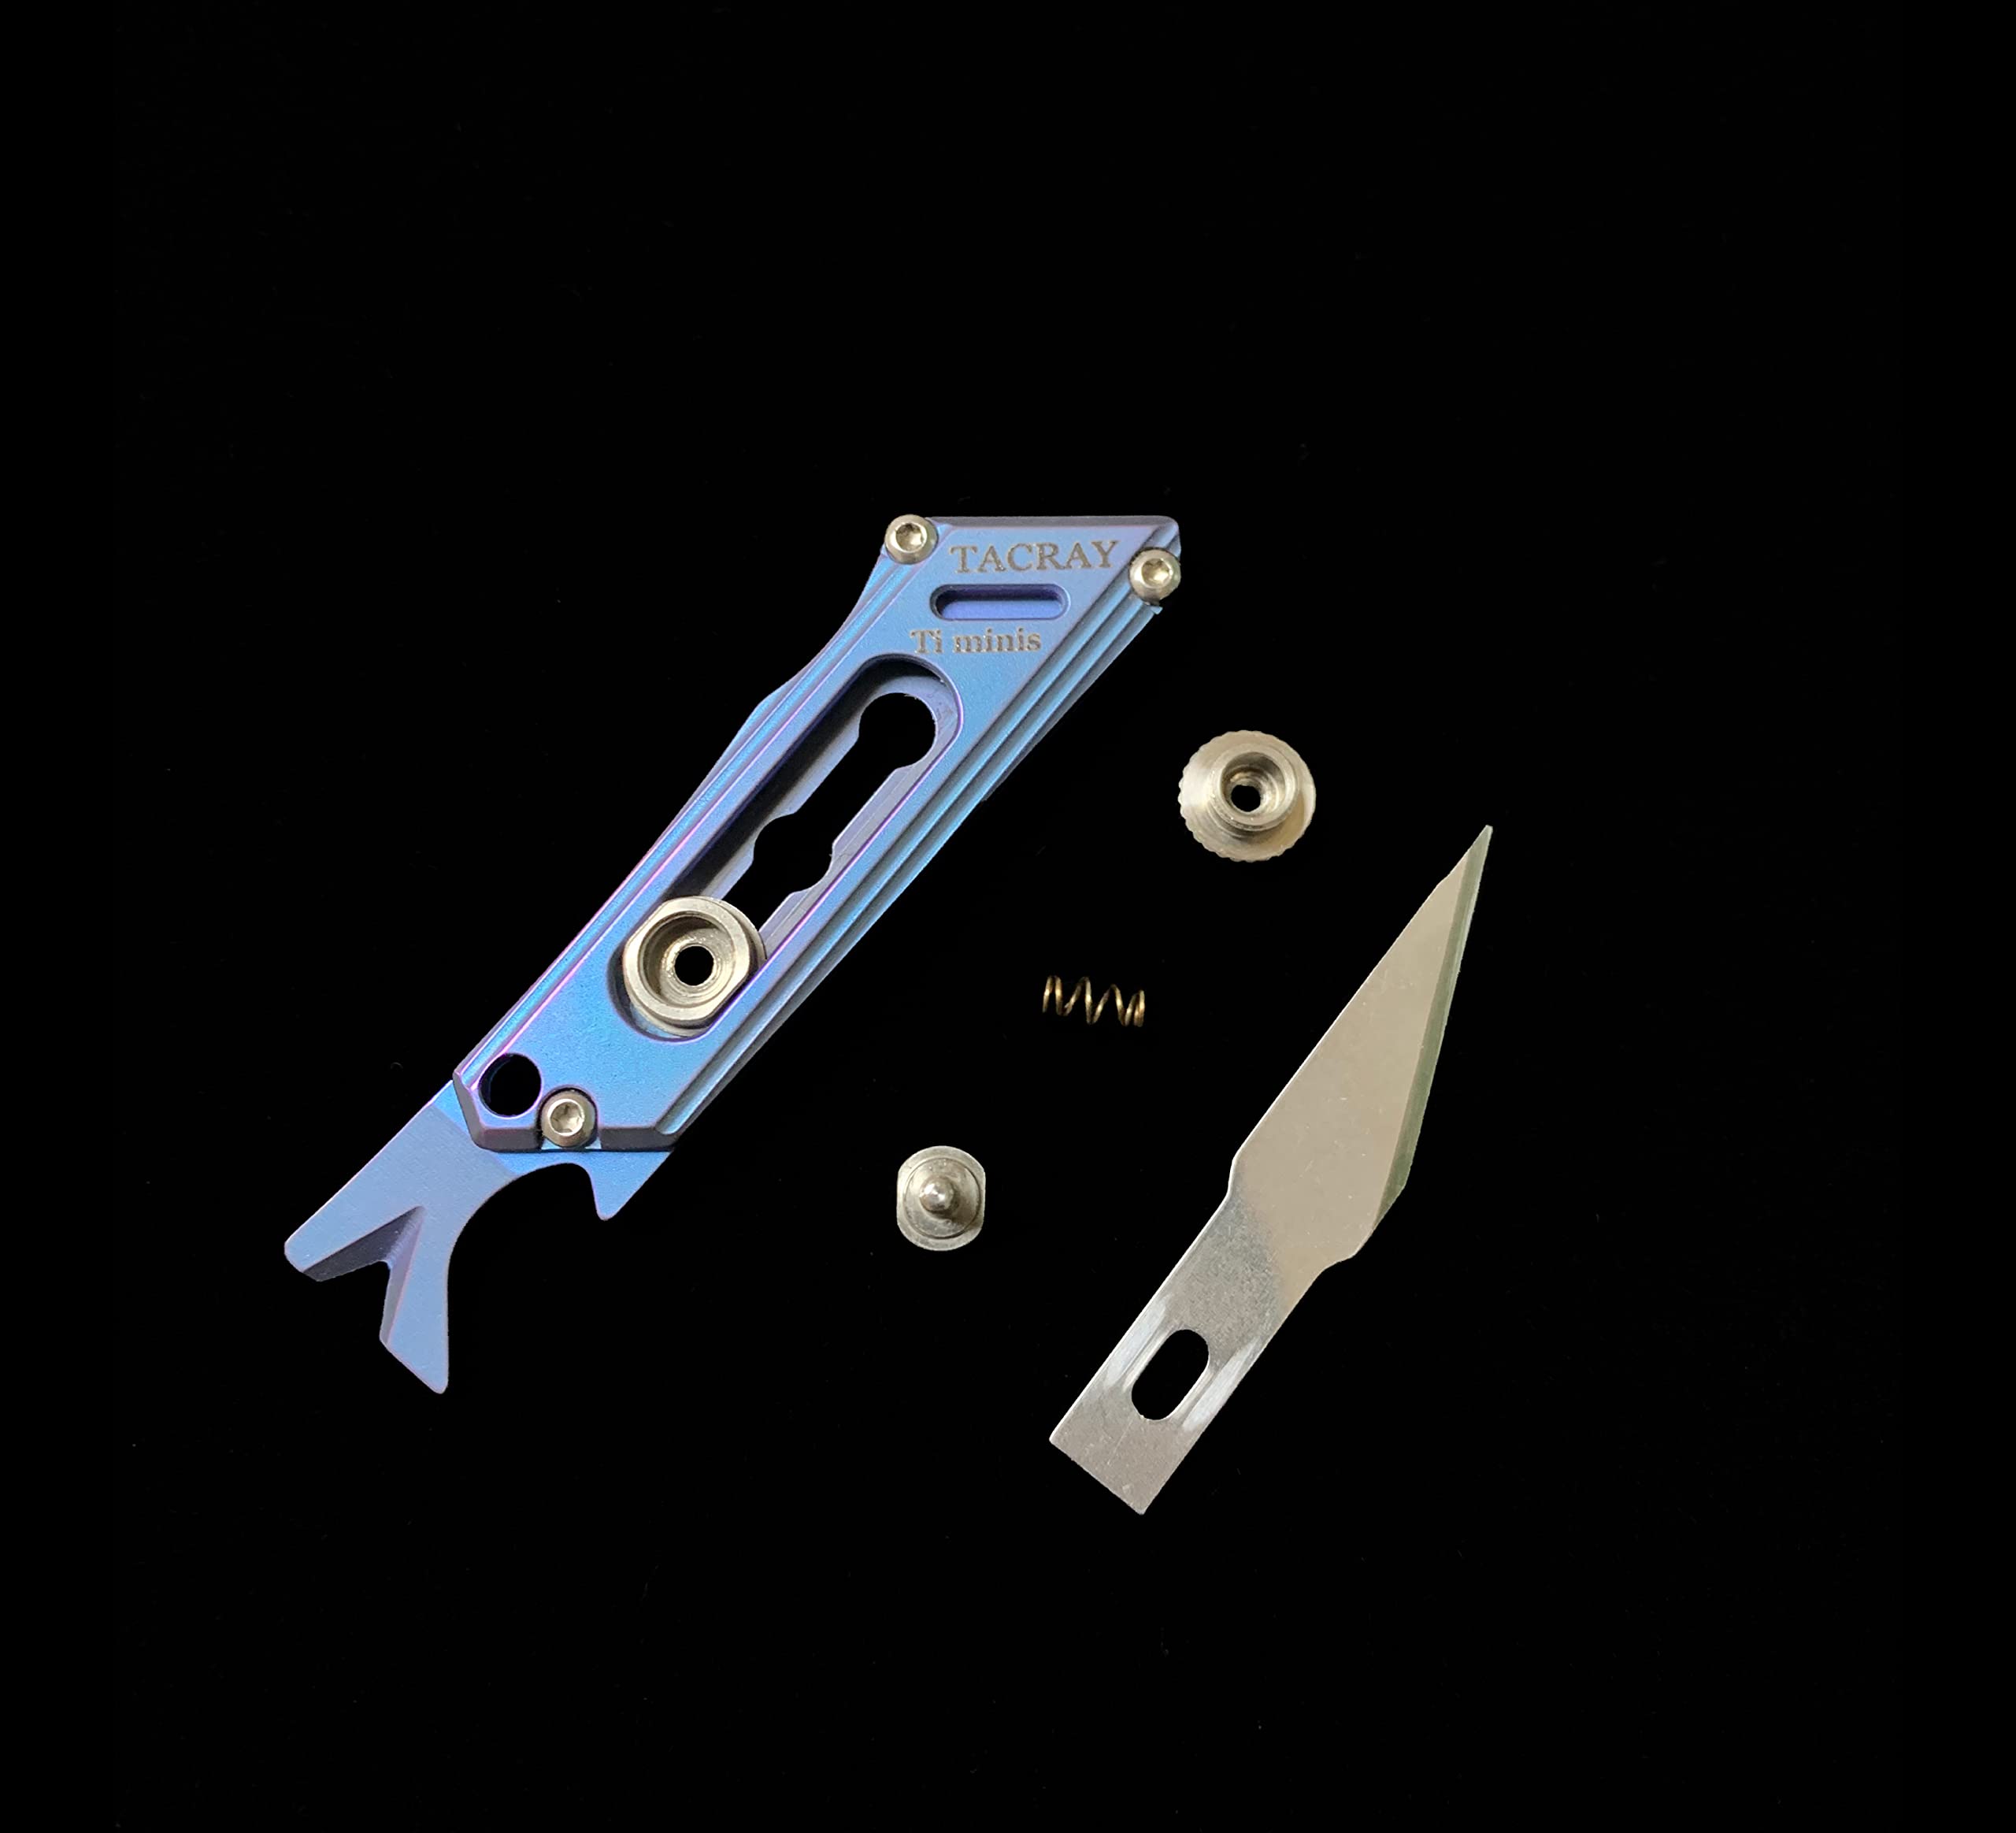 Tacray Titanium EDC Utility Knife with a bottle opener and in the tail, Pocket Knife Box Cutter with Retractable and Replaceable Blade, Mini Knife for Multiple Cutting Tasks（Blue)